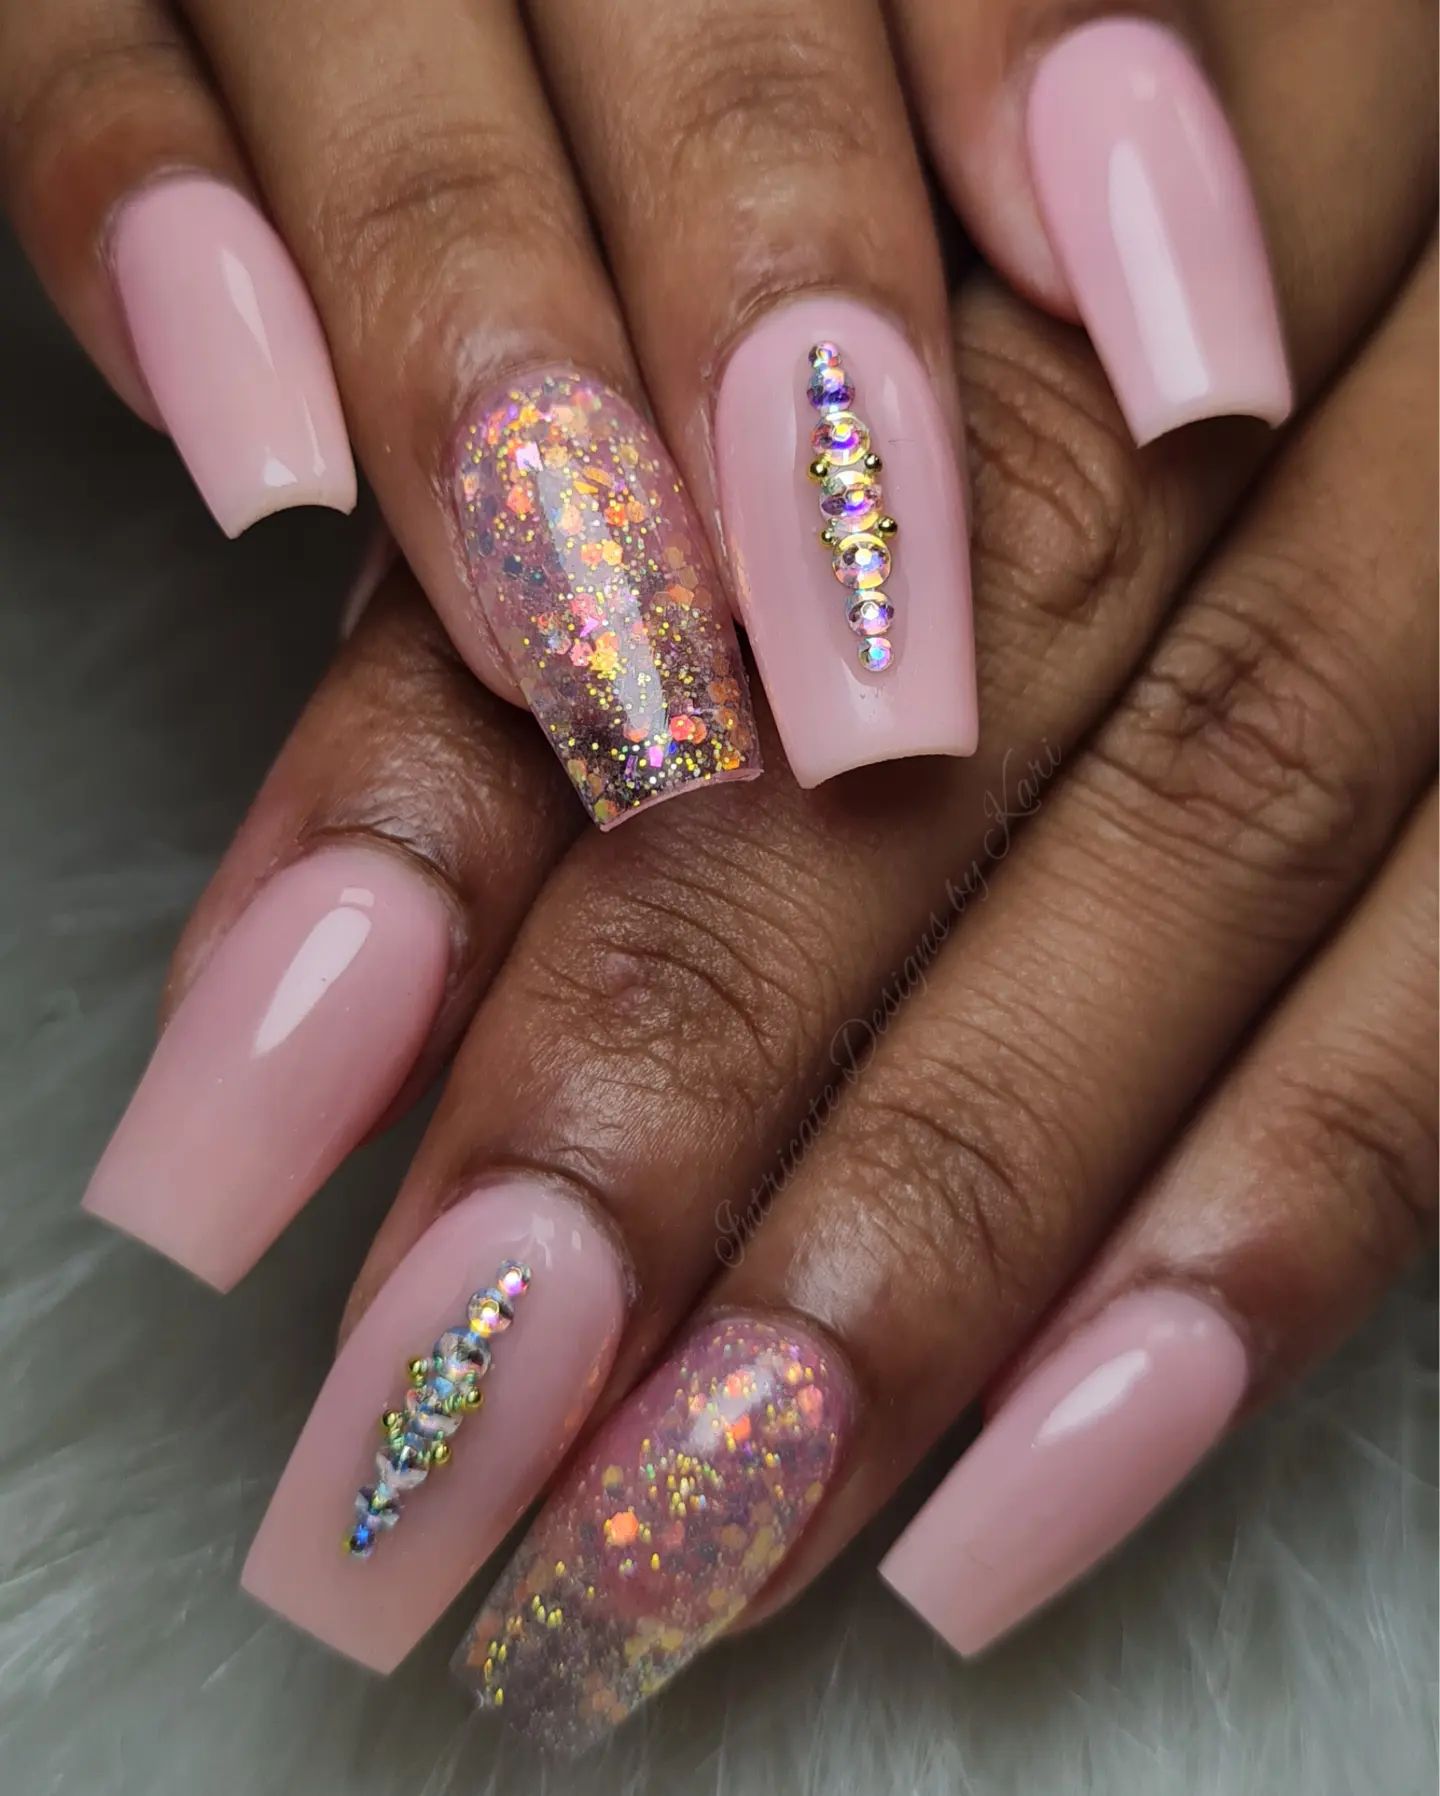 Pink glitter and these gemstones will look feminine and sexy. The manicure itself is perfect for formal moments.